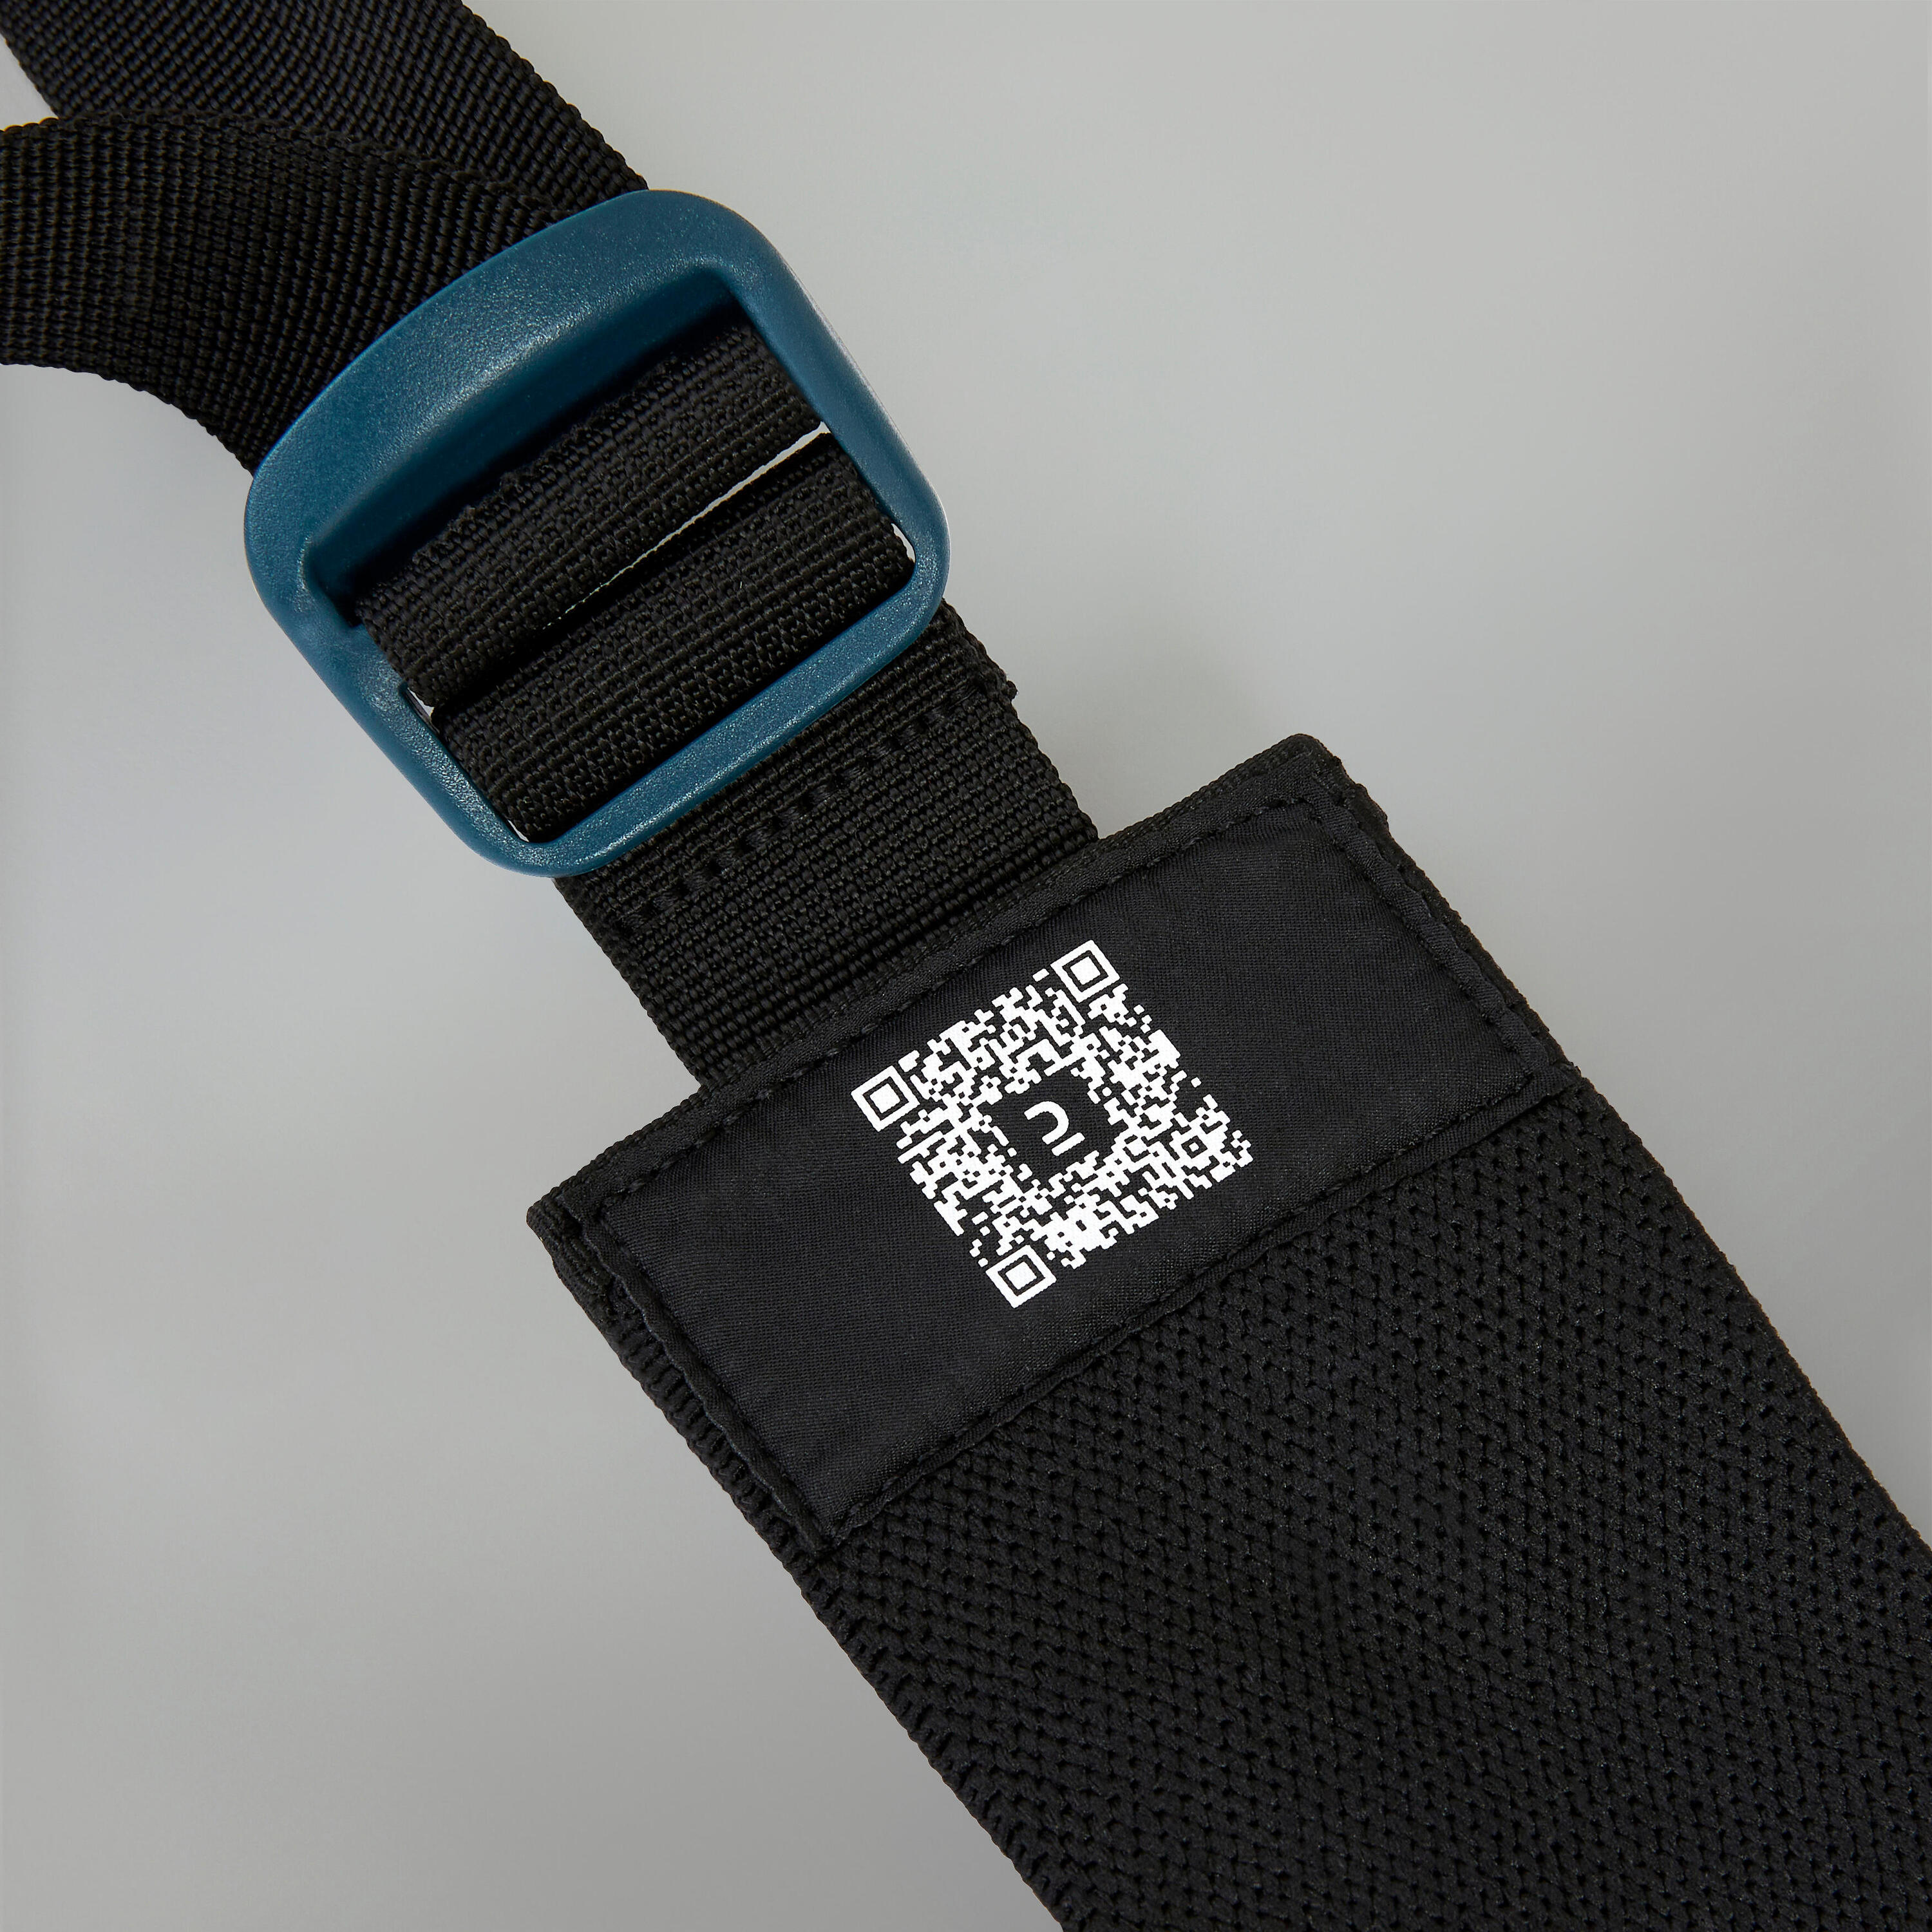 Adjustable Band for Pull-Up Assistance 9/9